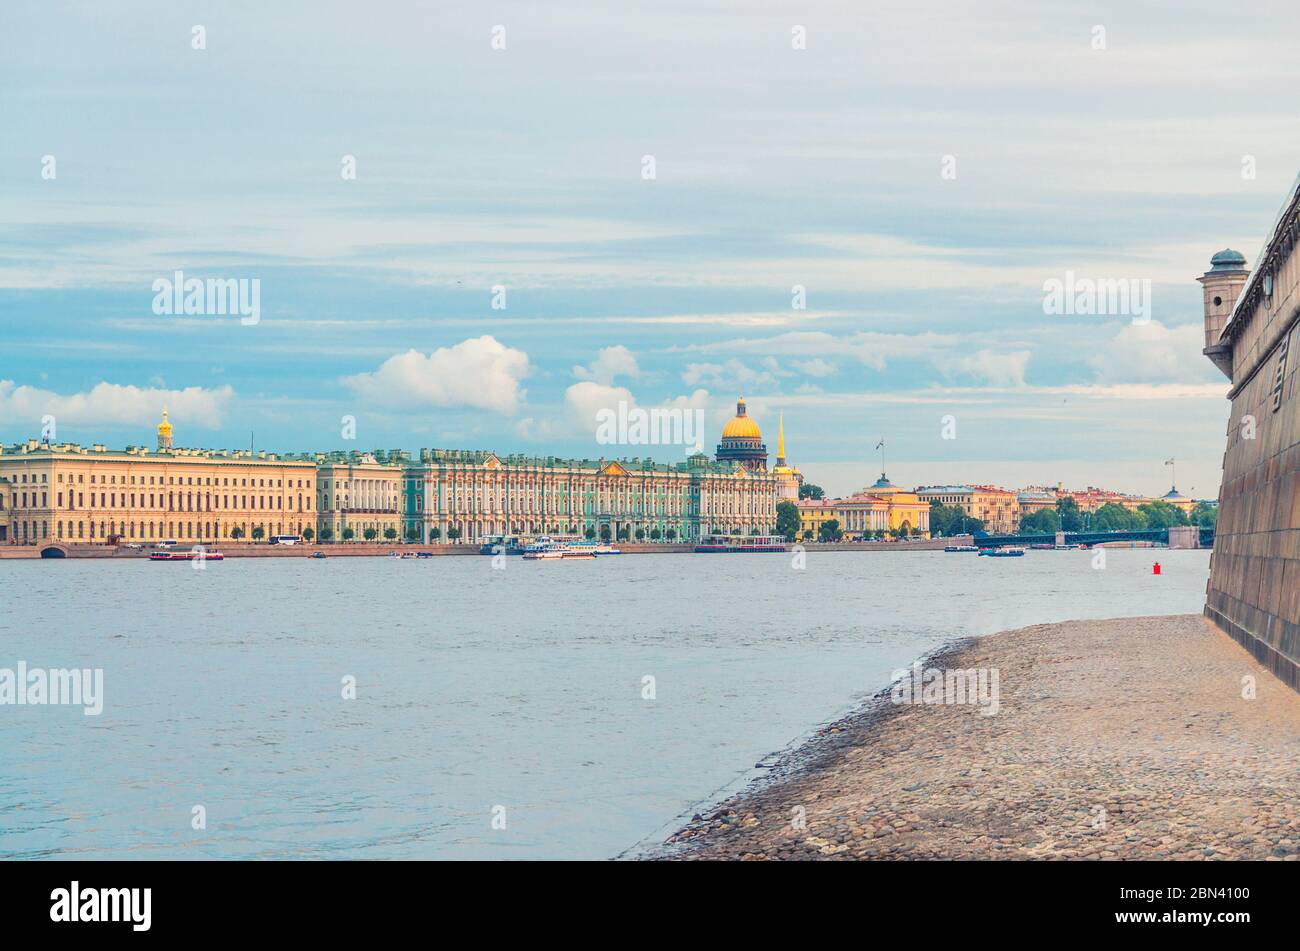 Cityscape of Saint Petersburg Leningrad with Winter Palace, State Hermitage Museum, Admiralty building, defense wall of Peter and Paul Fortress citadel on Zayachy Hare Island, Neva river, Russia Stock Photo